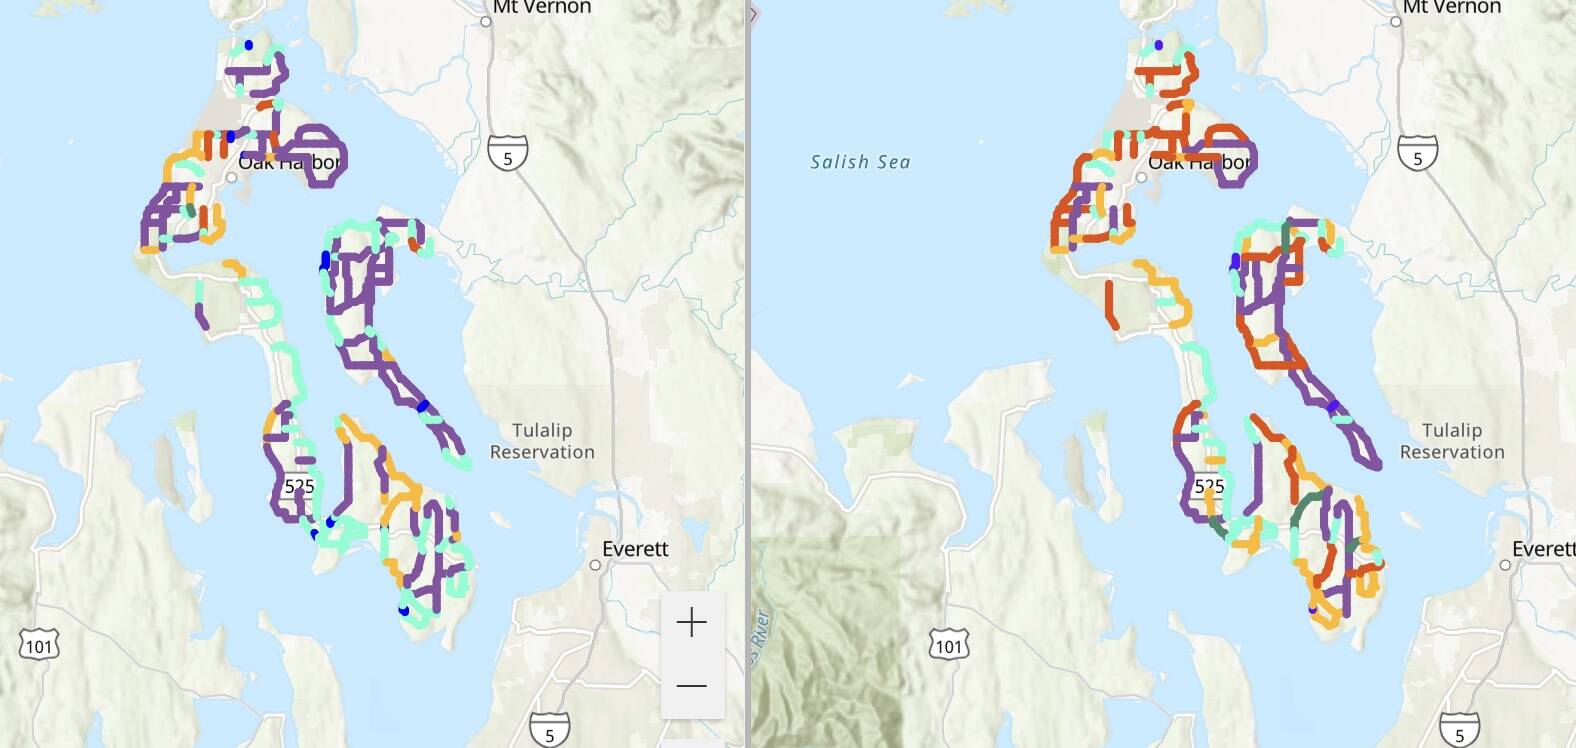 The Island County maps show the existing speed limits, to the left, and the proposed speed limits. Dark blue is 25 mph, green is 30 mph, turquoise is 35 mph, orange is 40 mph, red is 45 mph and purple is 50 mph.